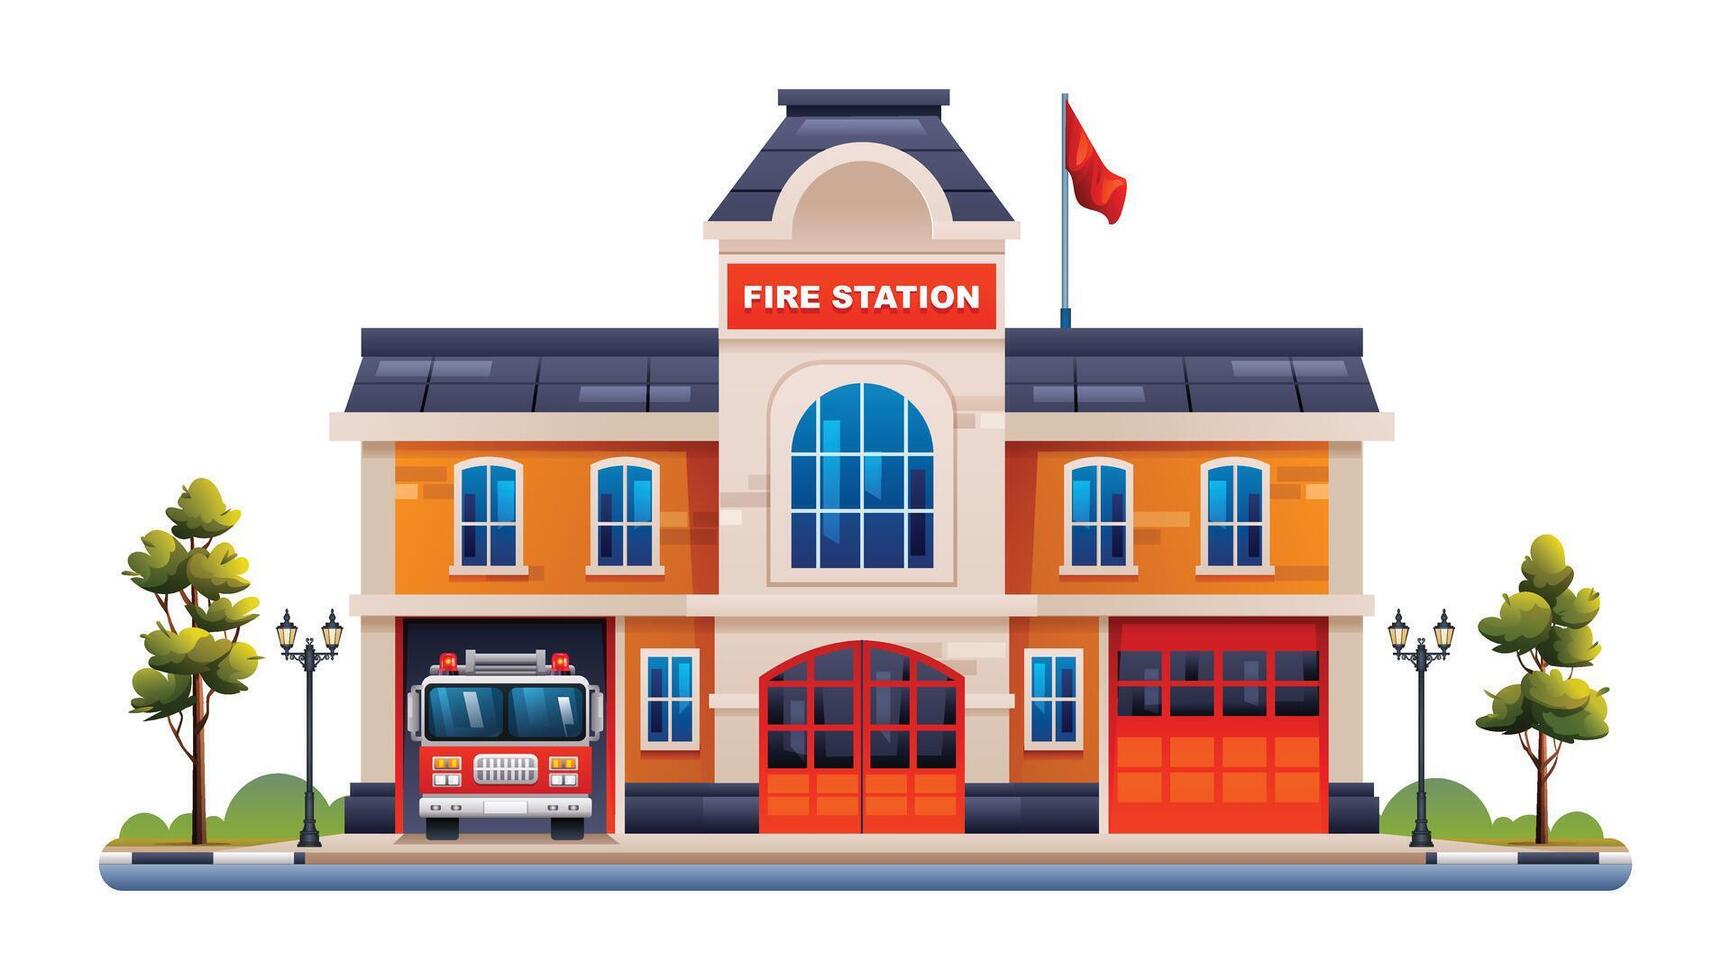 Fire station building with fire truck illustration. Fire department office vector isolated on white background